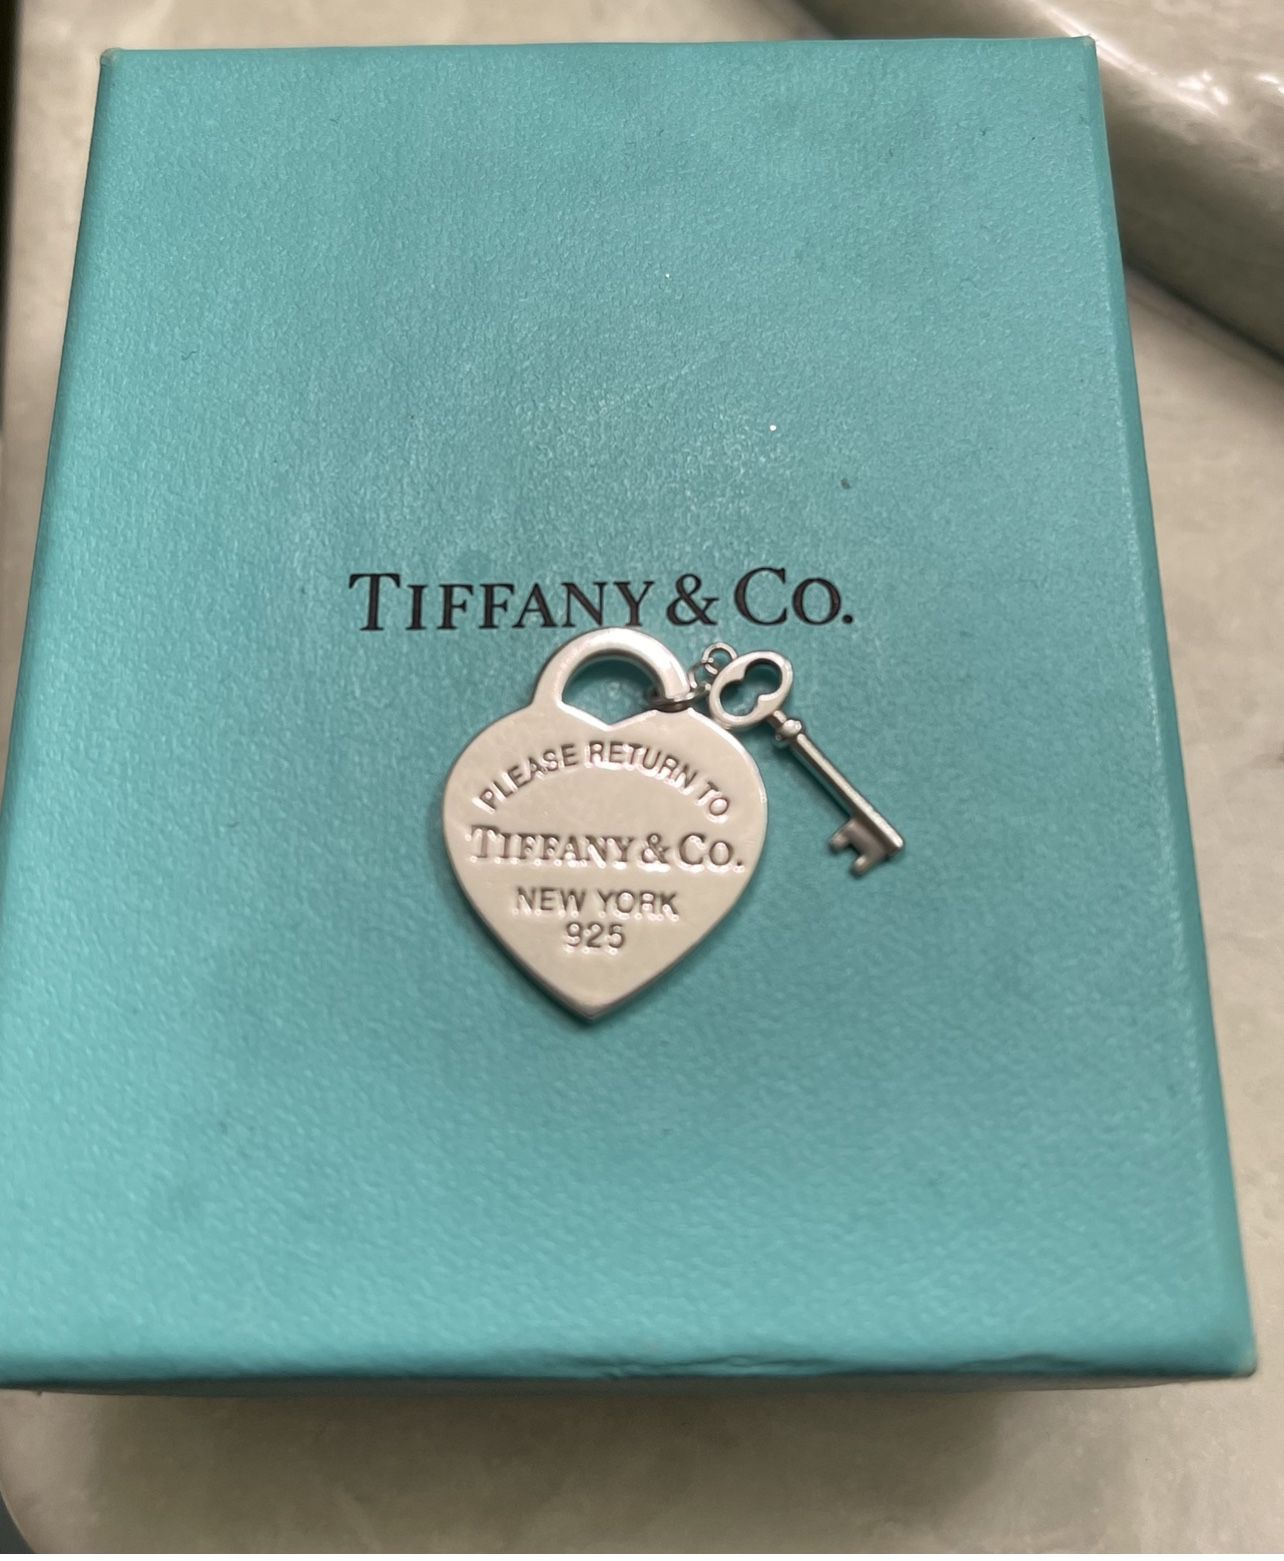 How to Sell Tiffany Jewelry, Tiffany Resale Value